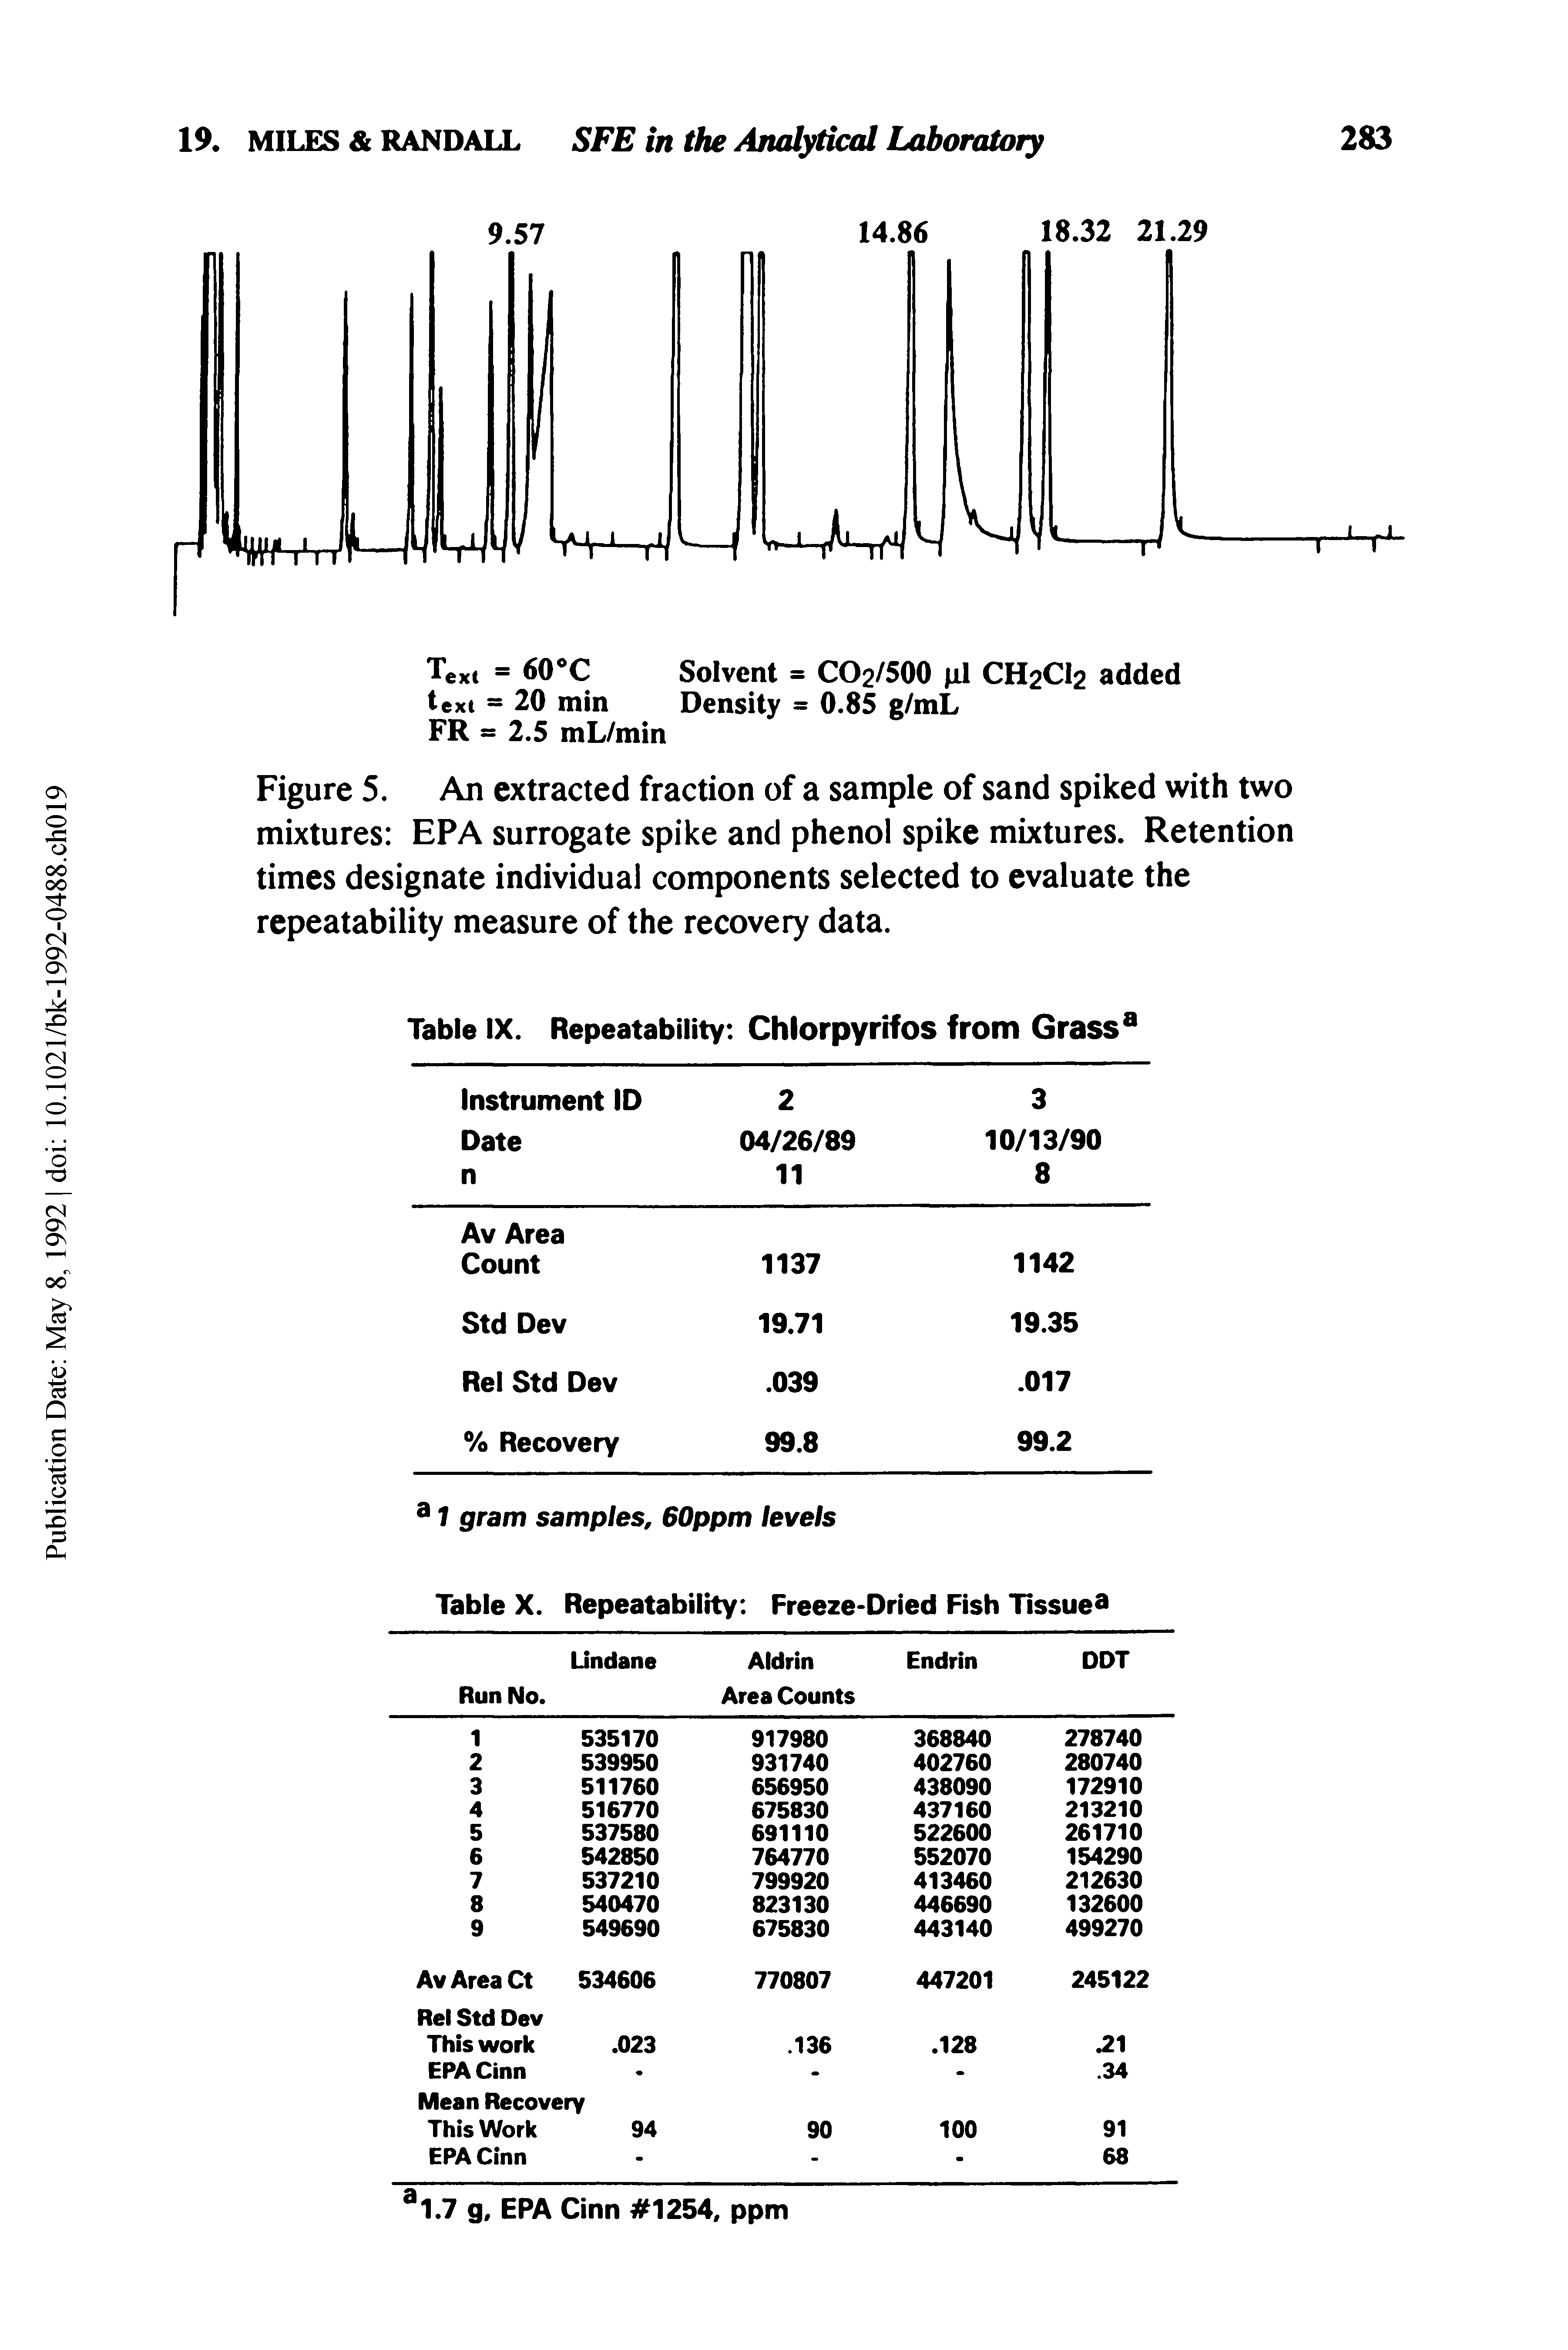 Figure 5. An extracted fraction of a sample of sand spiked with two mixtures EPA surrogate spike and phenol spike mixtures. Retention times designate individual components selected to evaluate the repeatability measure of the recovery data.